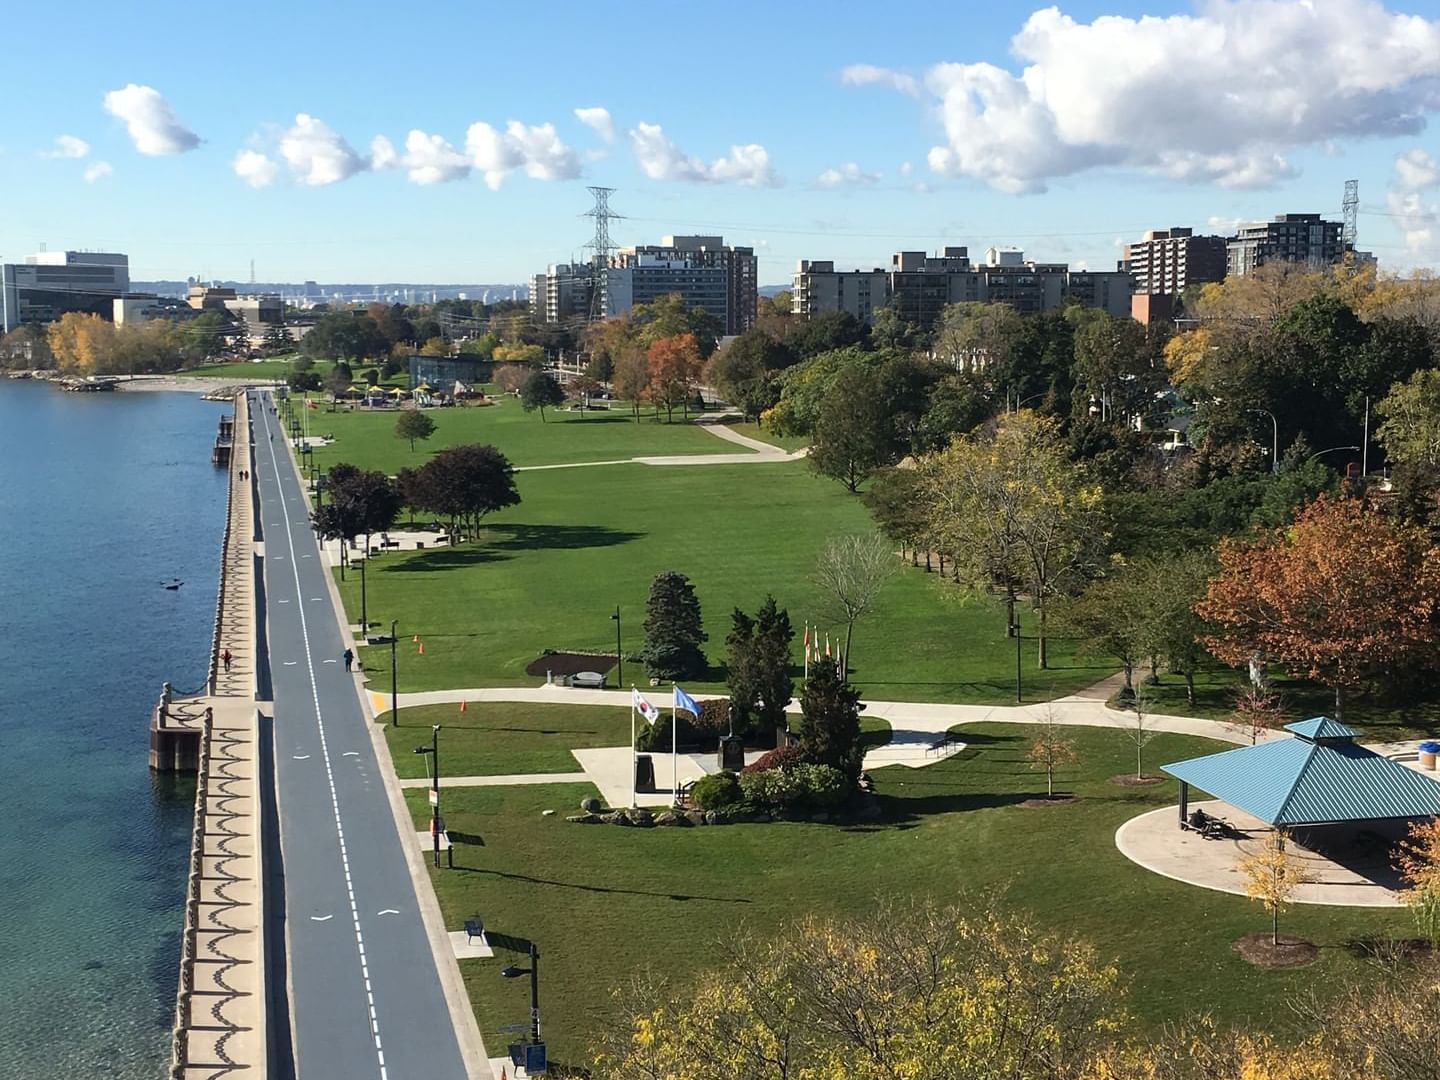 Arial view of Spencer Smith Park near Waterfront Hotel